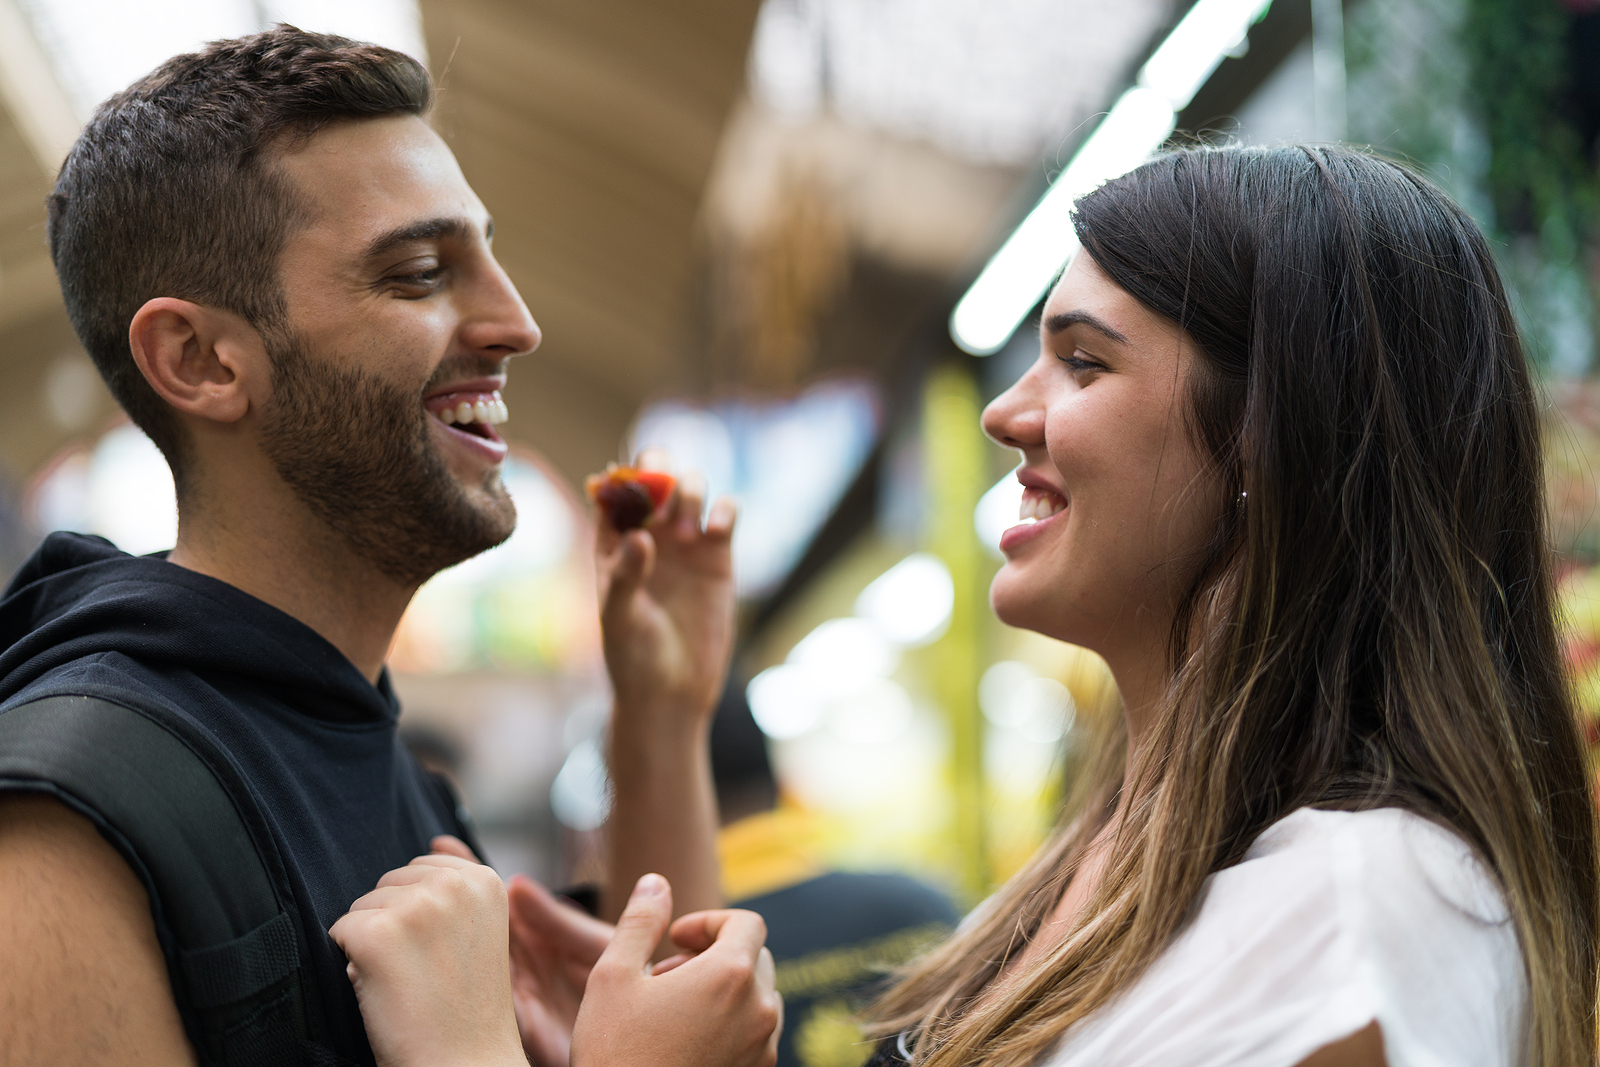 An attractive man and a woman share an intimate moment in public. Both laugh while she gives him a bite of a snack.